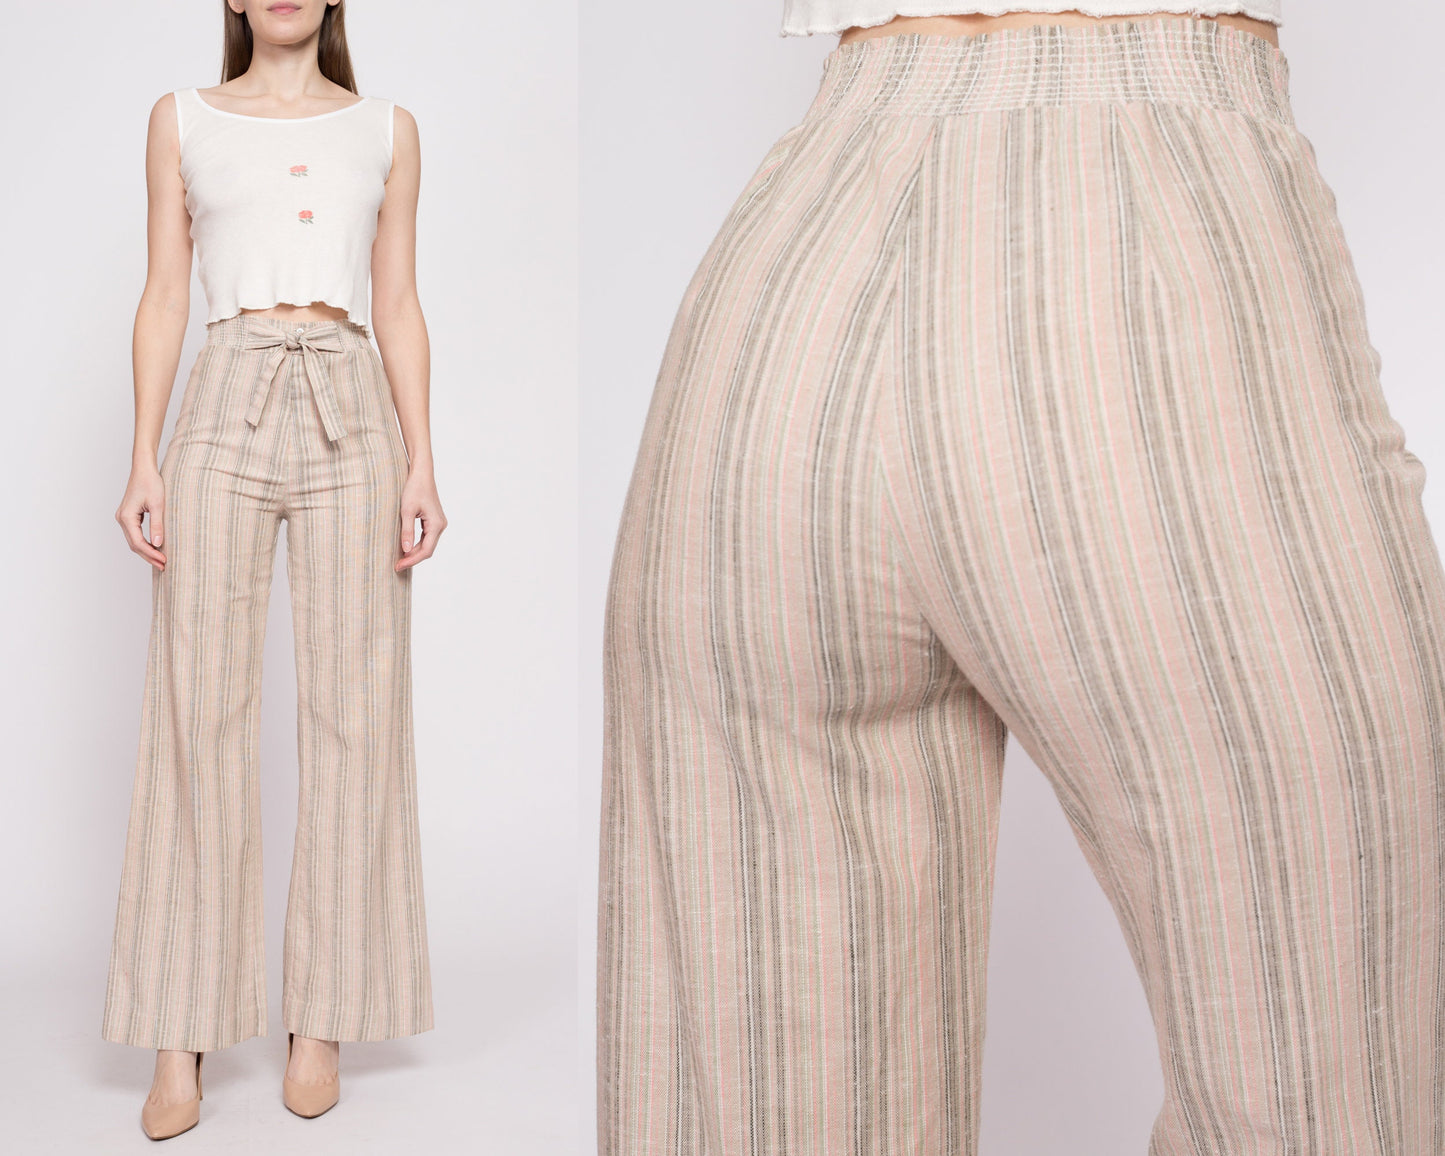 70s Striped High Waisted Flared Pants - XS to Small